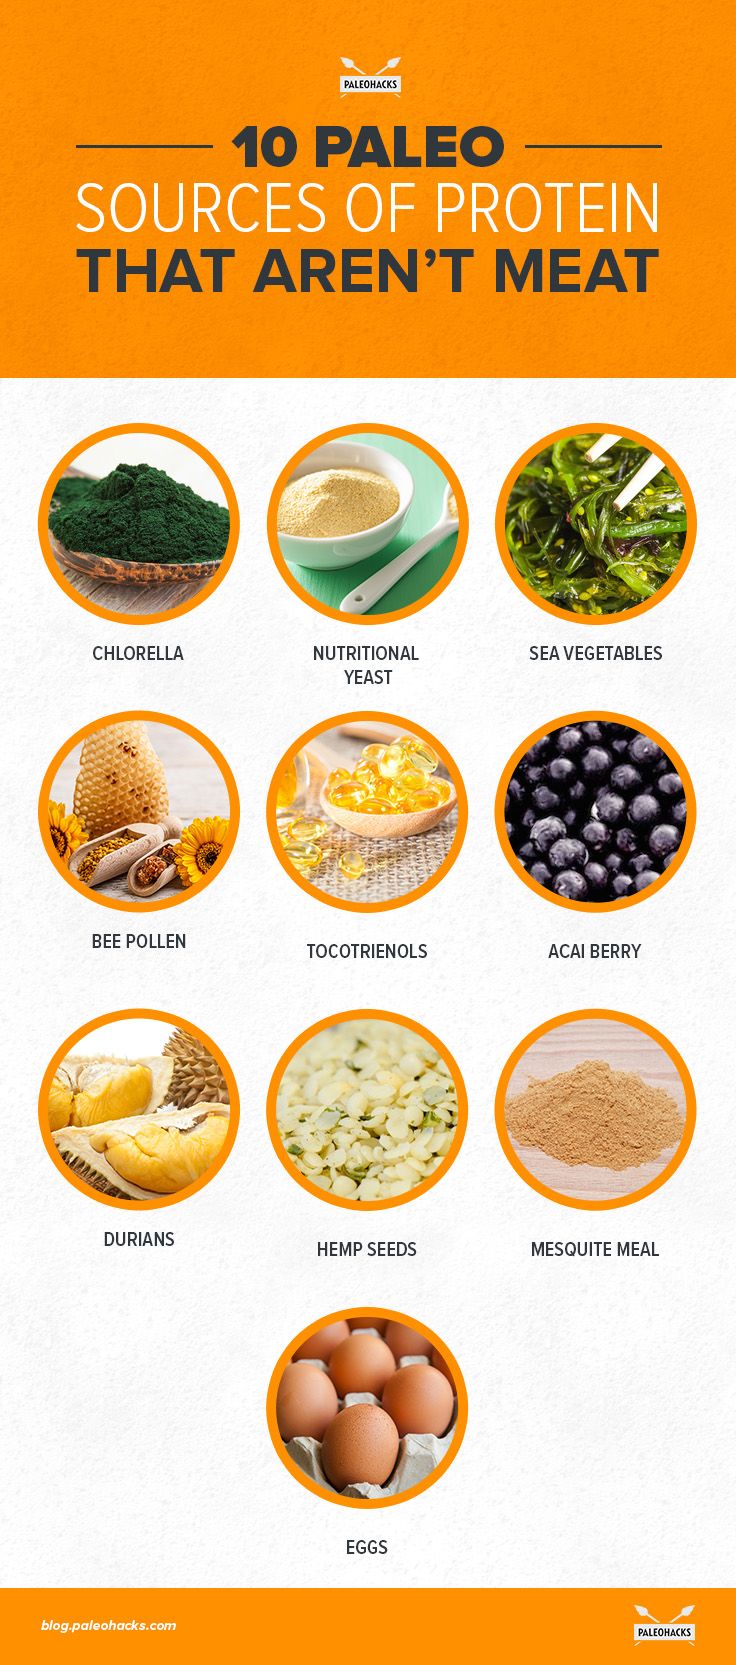 10_Paleo_Sources_of_Protein_That_Are_not_Meat